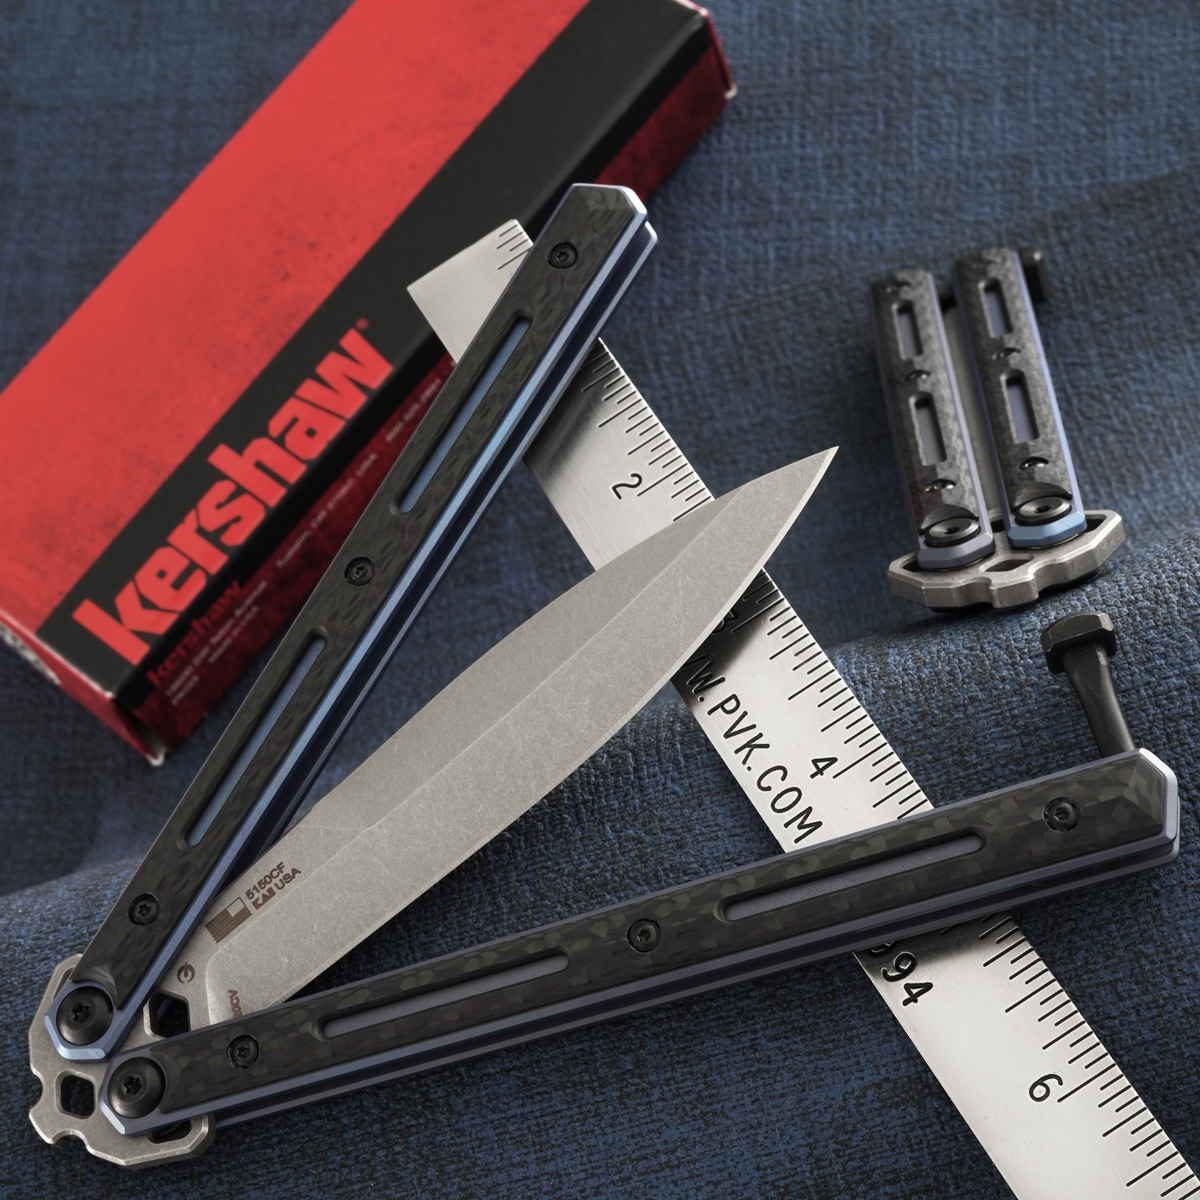 Kershaw 5150CF Lucha Balisong/Butterfly Knife - Knives for Sale